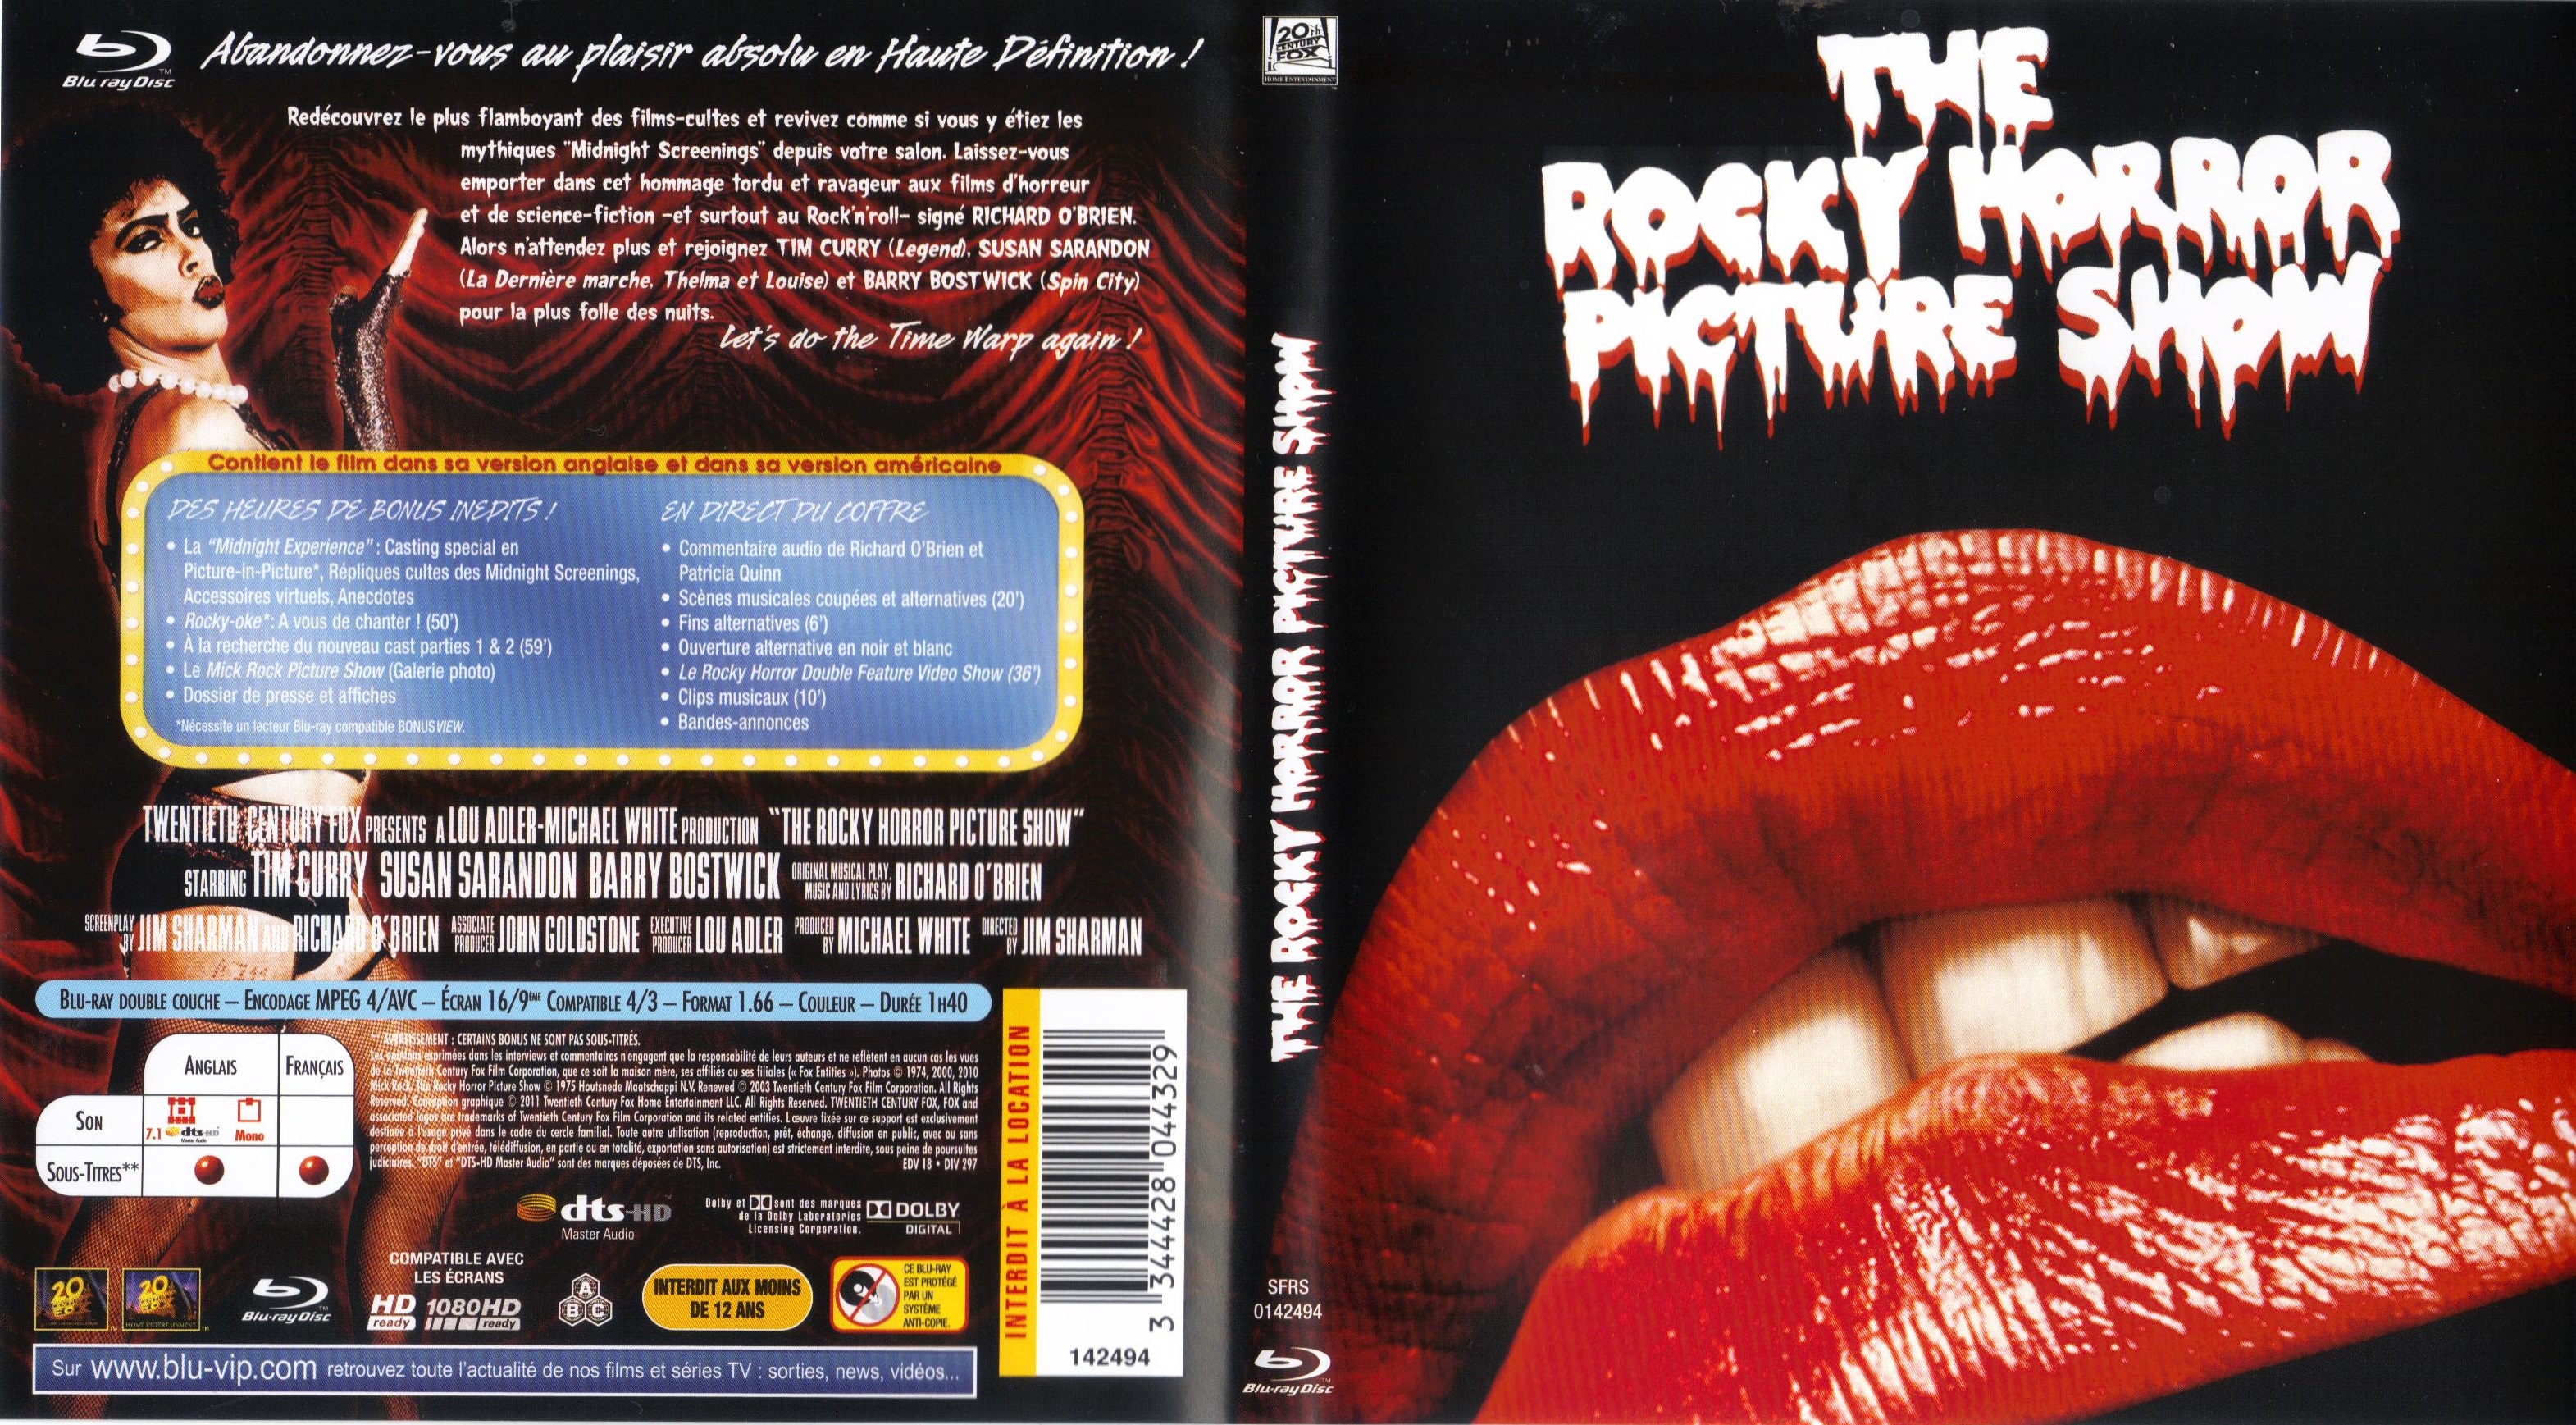 Jaquette DVD The rocky horror picture show (BLU-RAY)